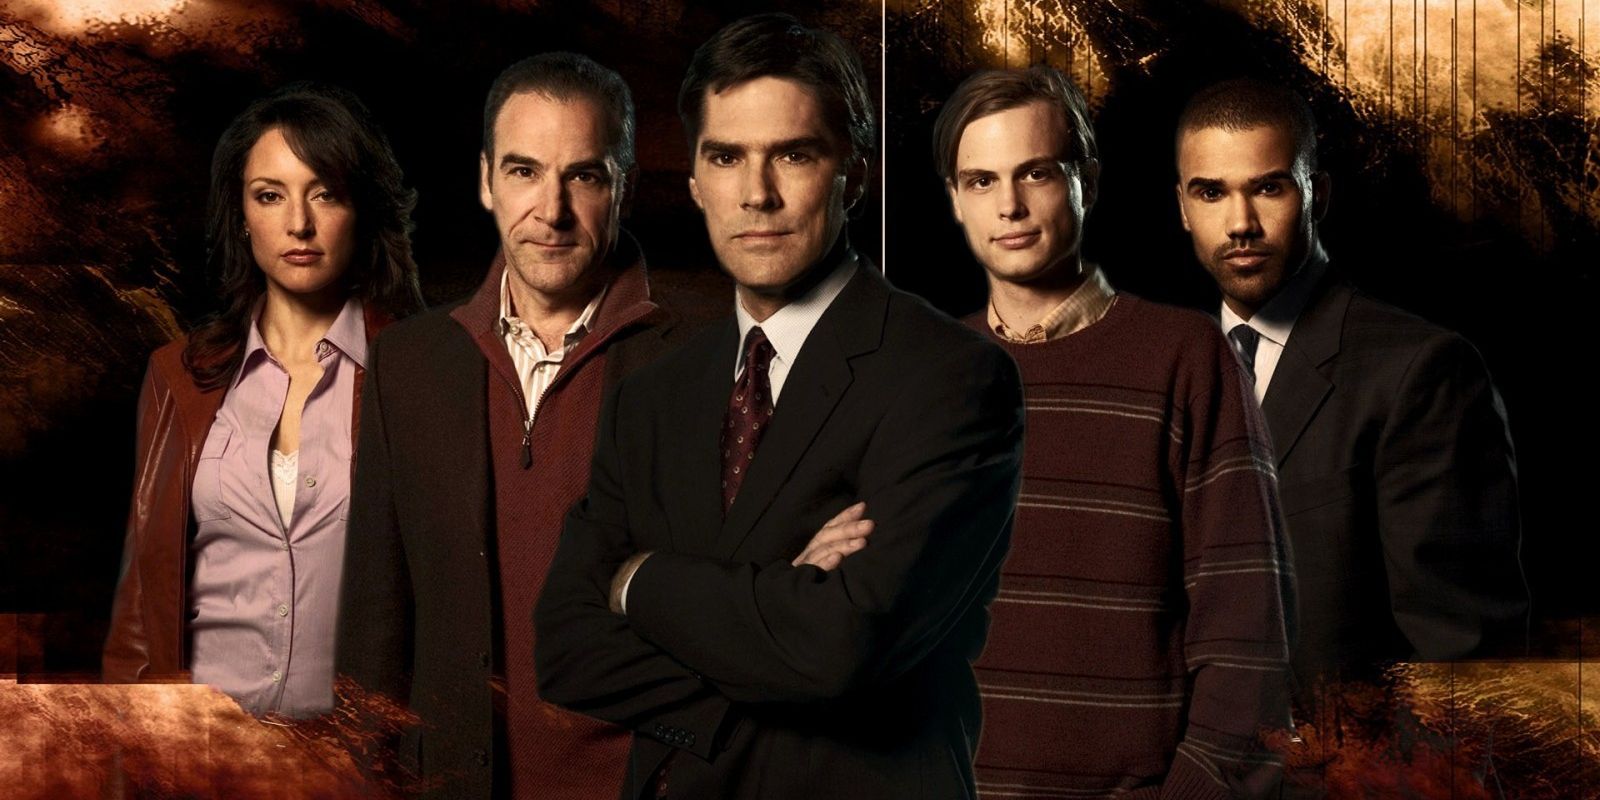 Criminal Minds: One of the Best Episode Is Based on the Manson Family.